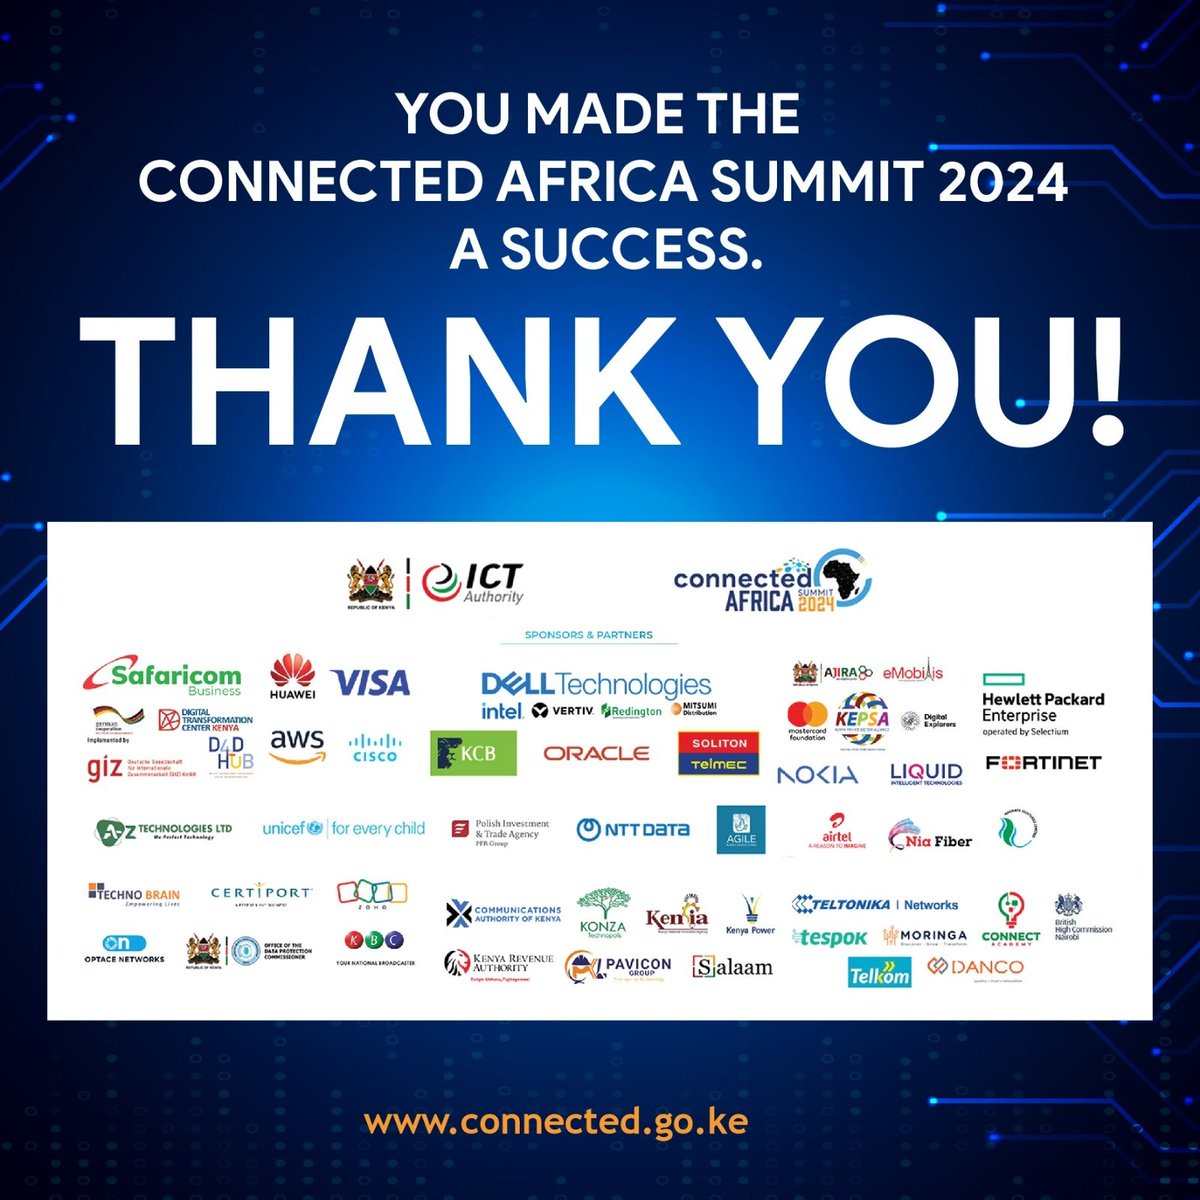 We extend our sincerest gratitude to all our partners. It is your unwavering support and belief in shaping Africa's digital future that made the #ConnectedAfricaSummit2024 a success. We truly appreciate your commitment & look forward to partnering again in the near future.